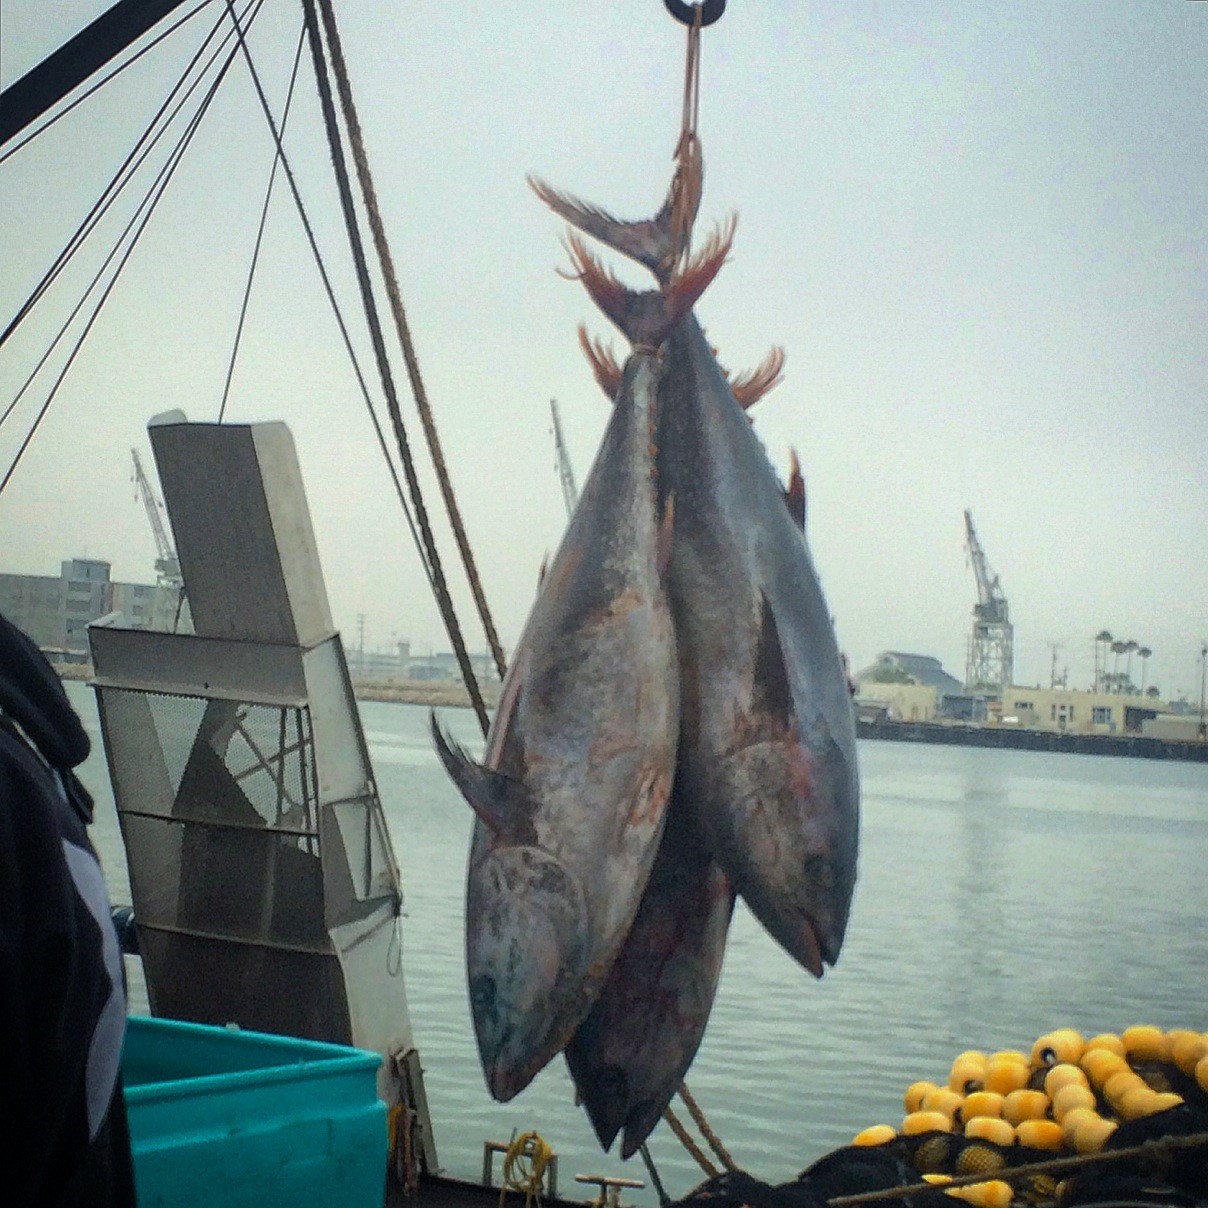 Pacific bluefin tuna being offloaded